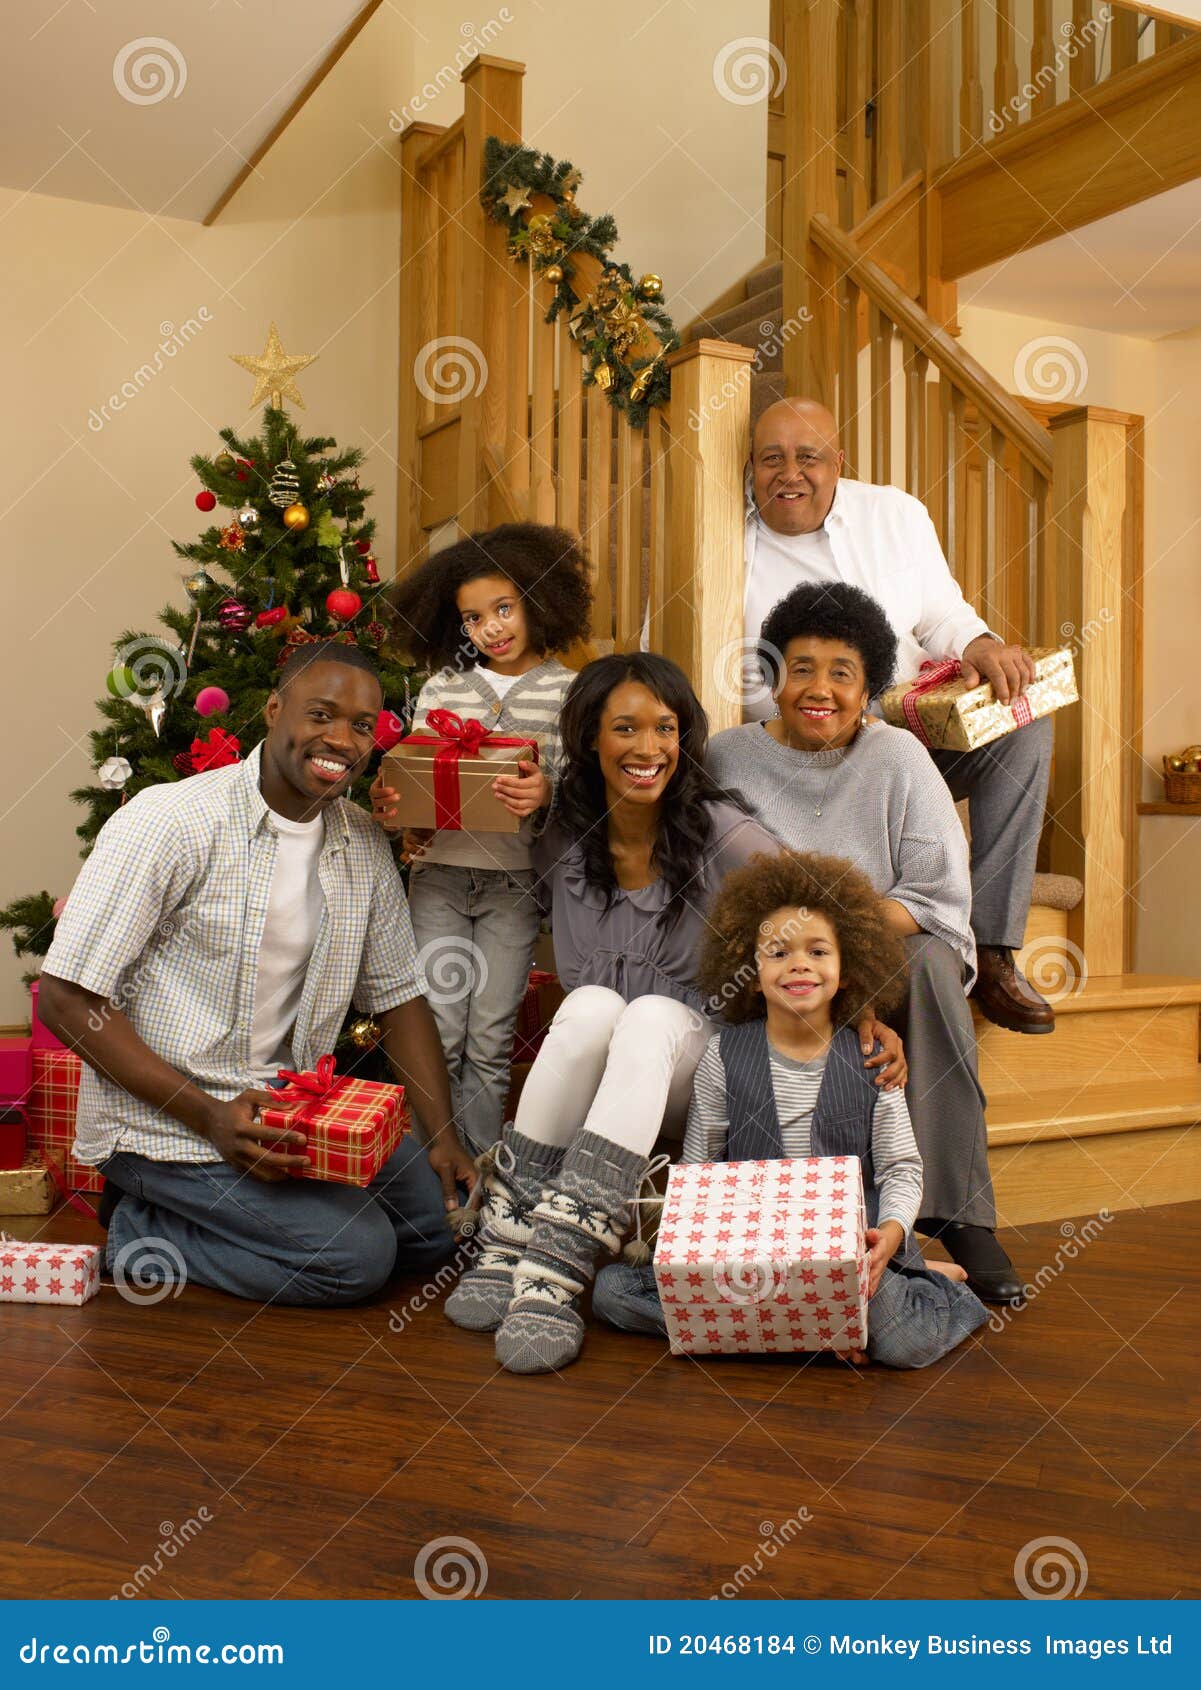 mixed race family exchanging gifts at christmas